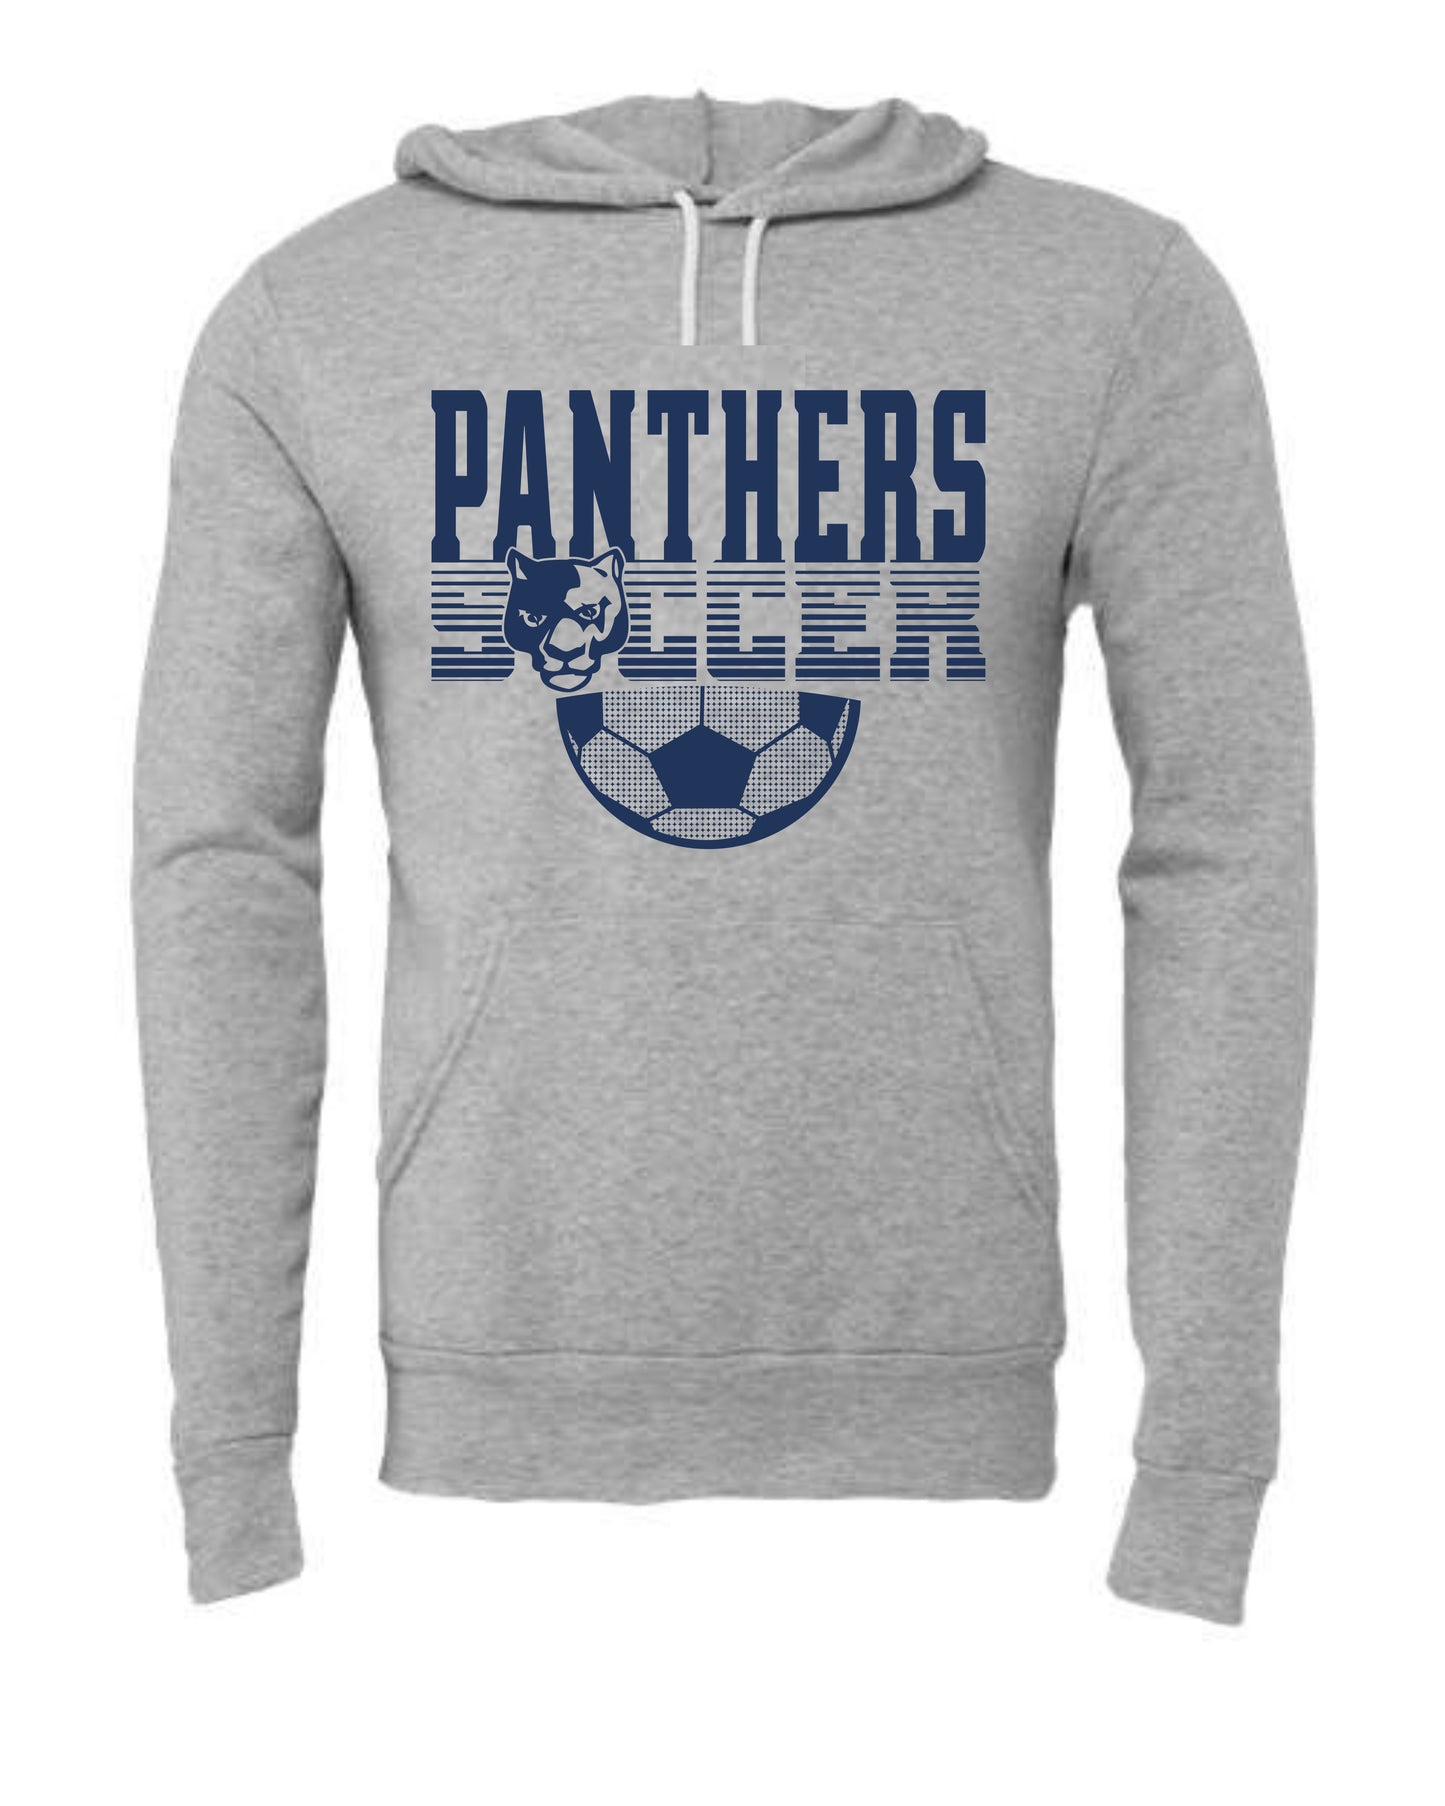 Panthers Soccer Faded - Adult Hoodie